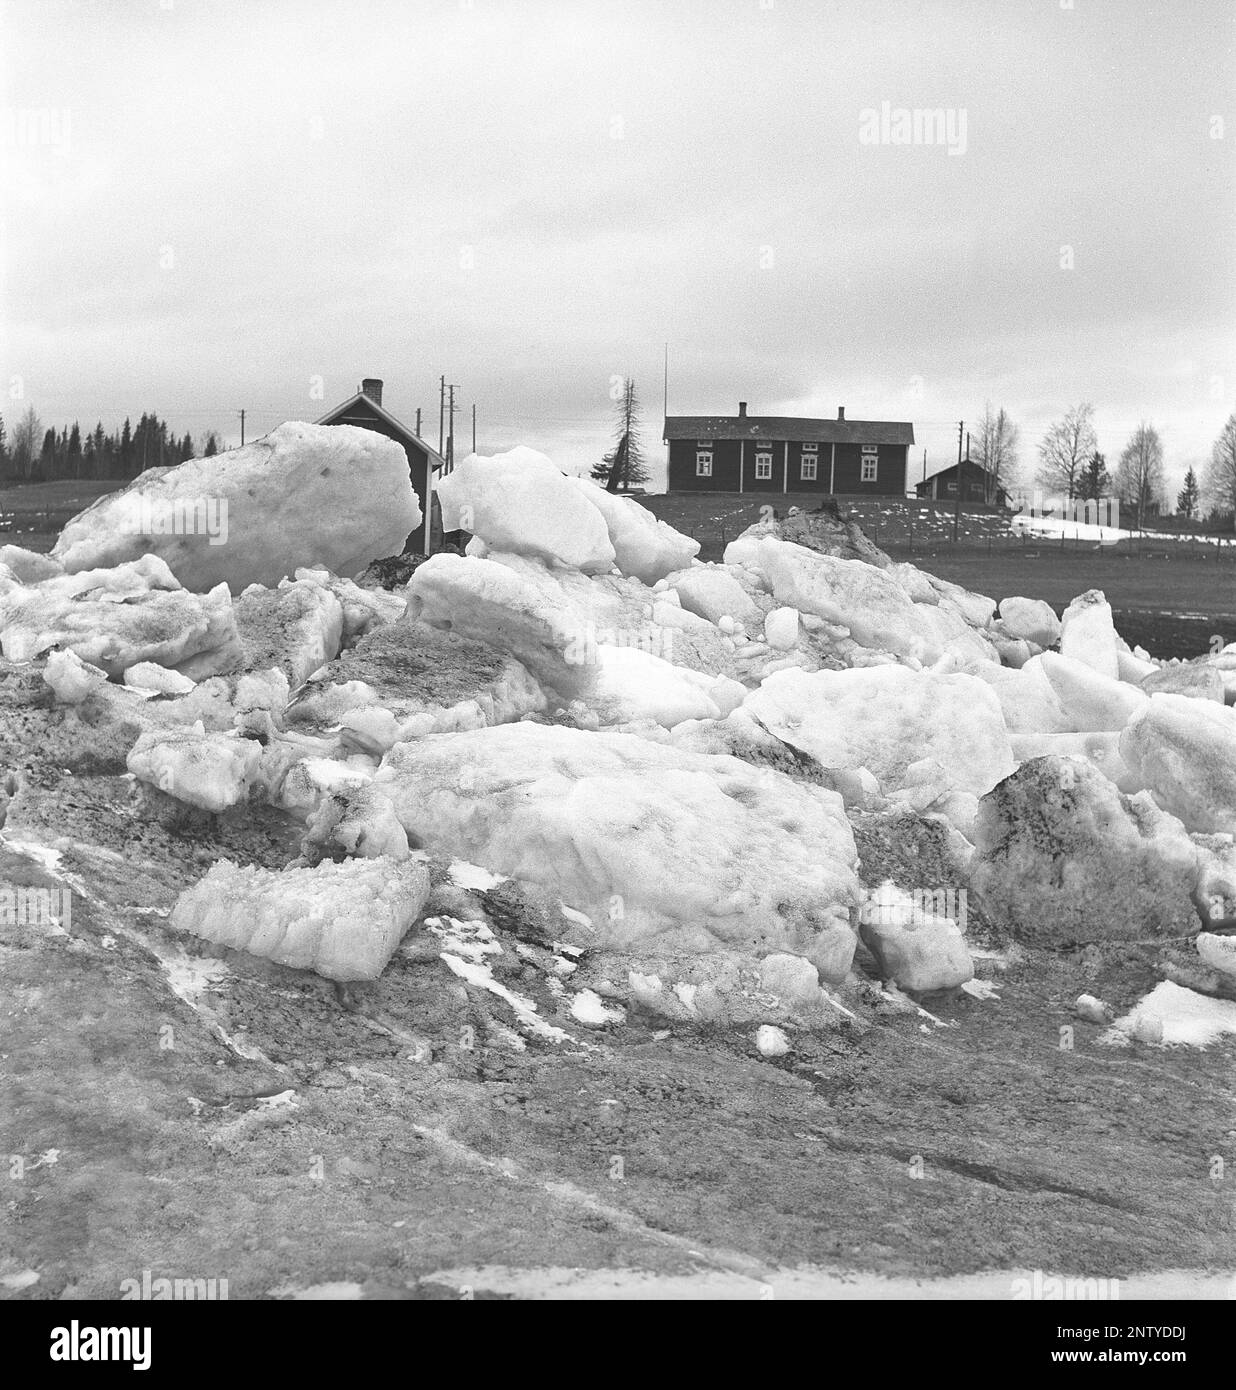 Natural disaster in the 1940s. In the early summer 20-23 may 1944, the water in the river Torne älv flooded over due to a mass of ice that dammed the water 3,5 meters higher than normal. The consequences were severe. On the surrounding grounds meters of ice was left behind when the water drained away and destroyed farm buildings and covering the fields. The village Korpikylä near Skogskärr and it's lower grounds covered in ice and the houses up higher that luckily escaped the ice. Kristoffersson ref H122-2 Stock Photo